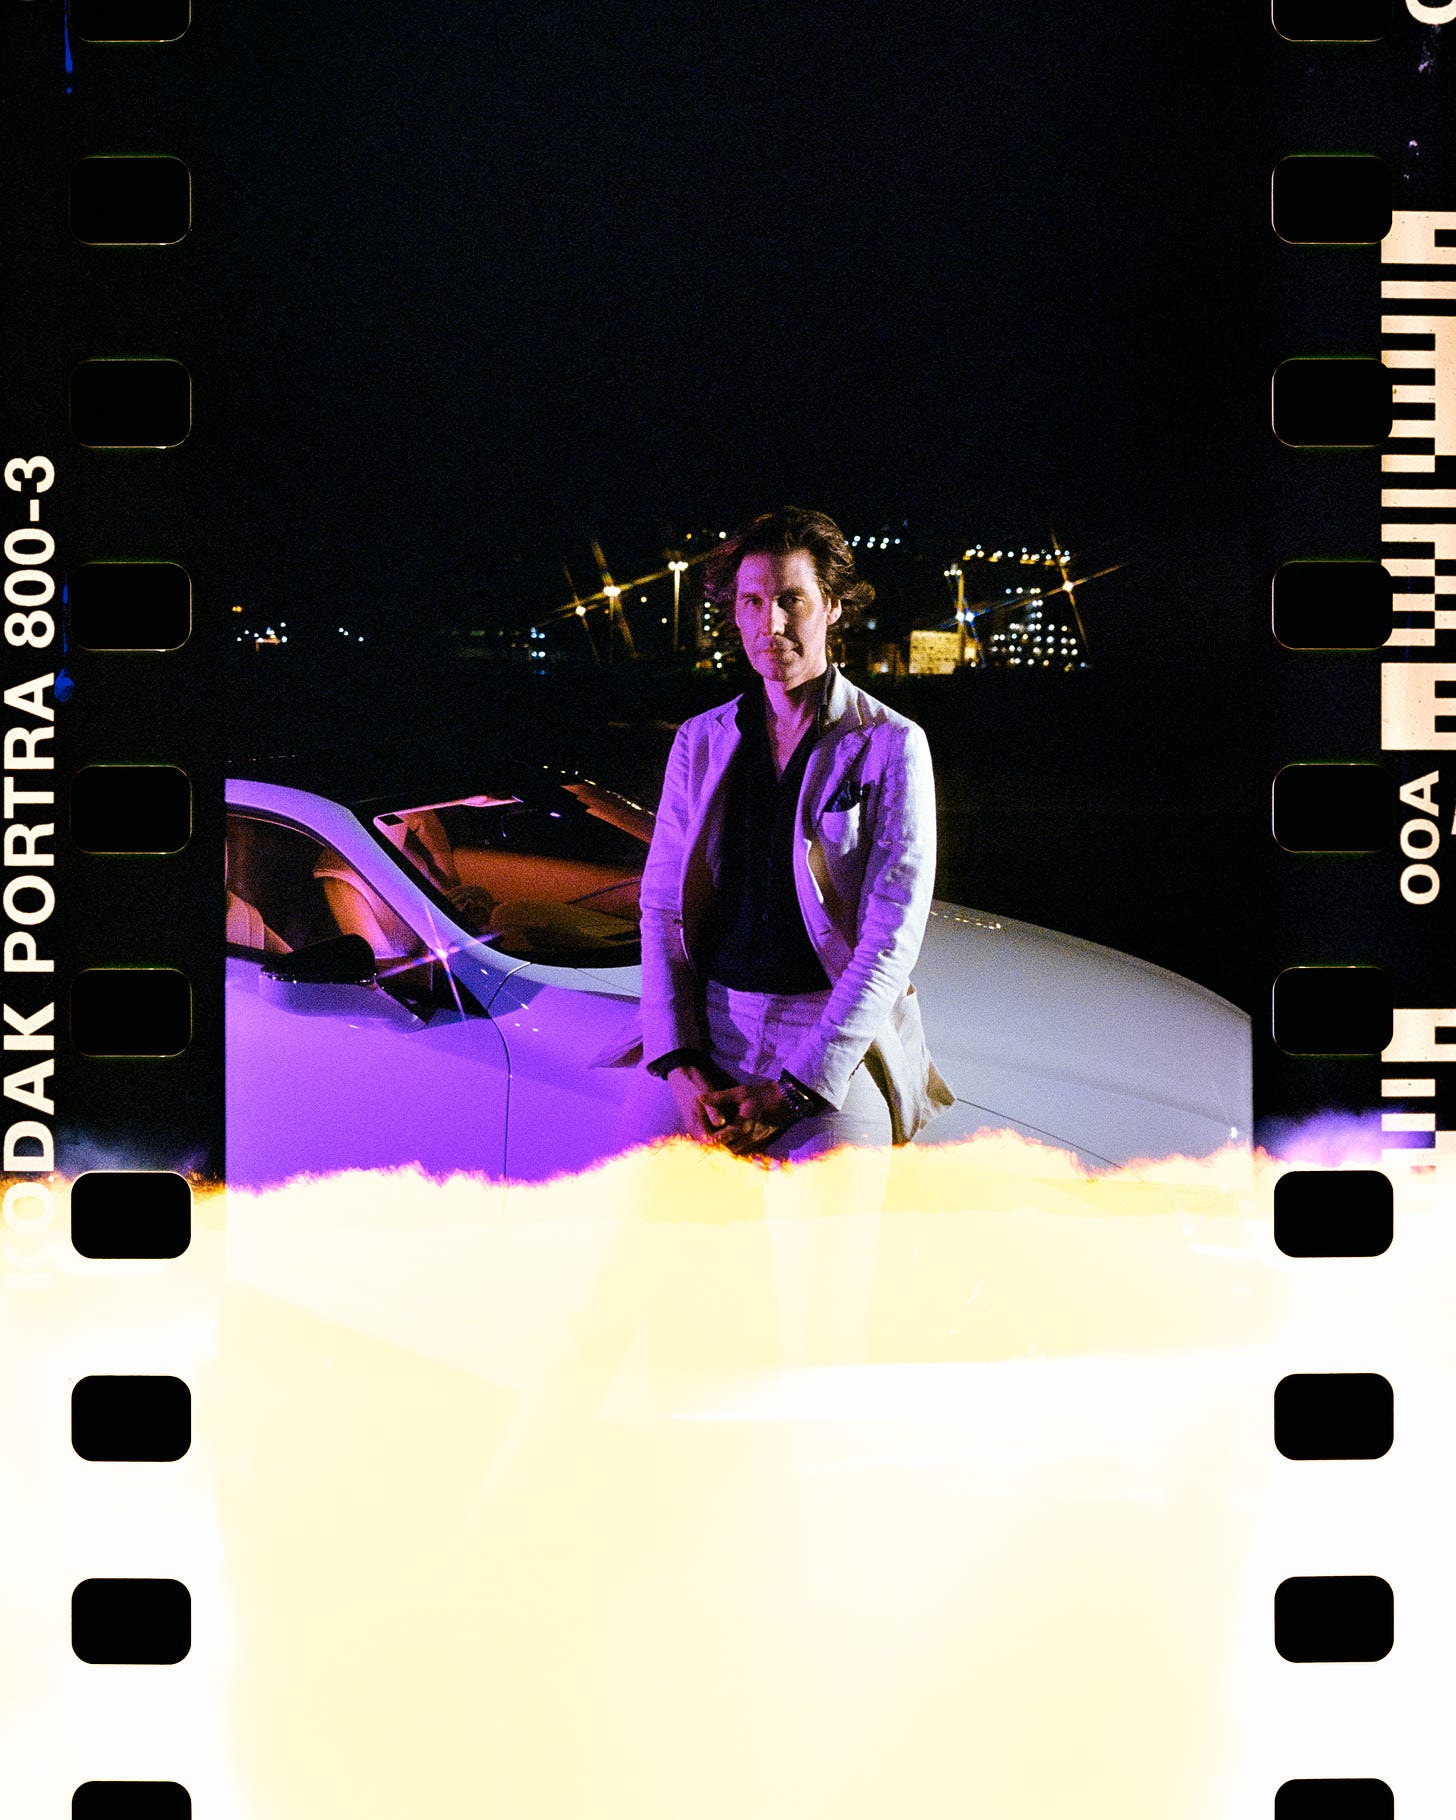 A raw scan of the film with borders to show part of the process